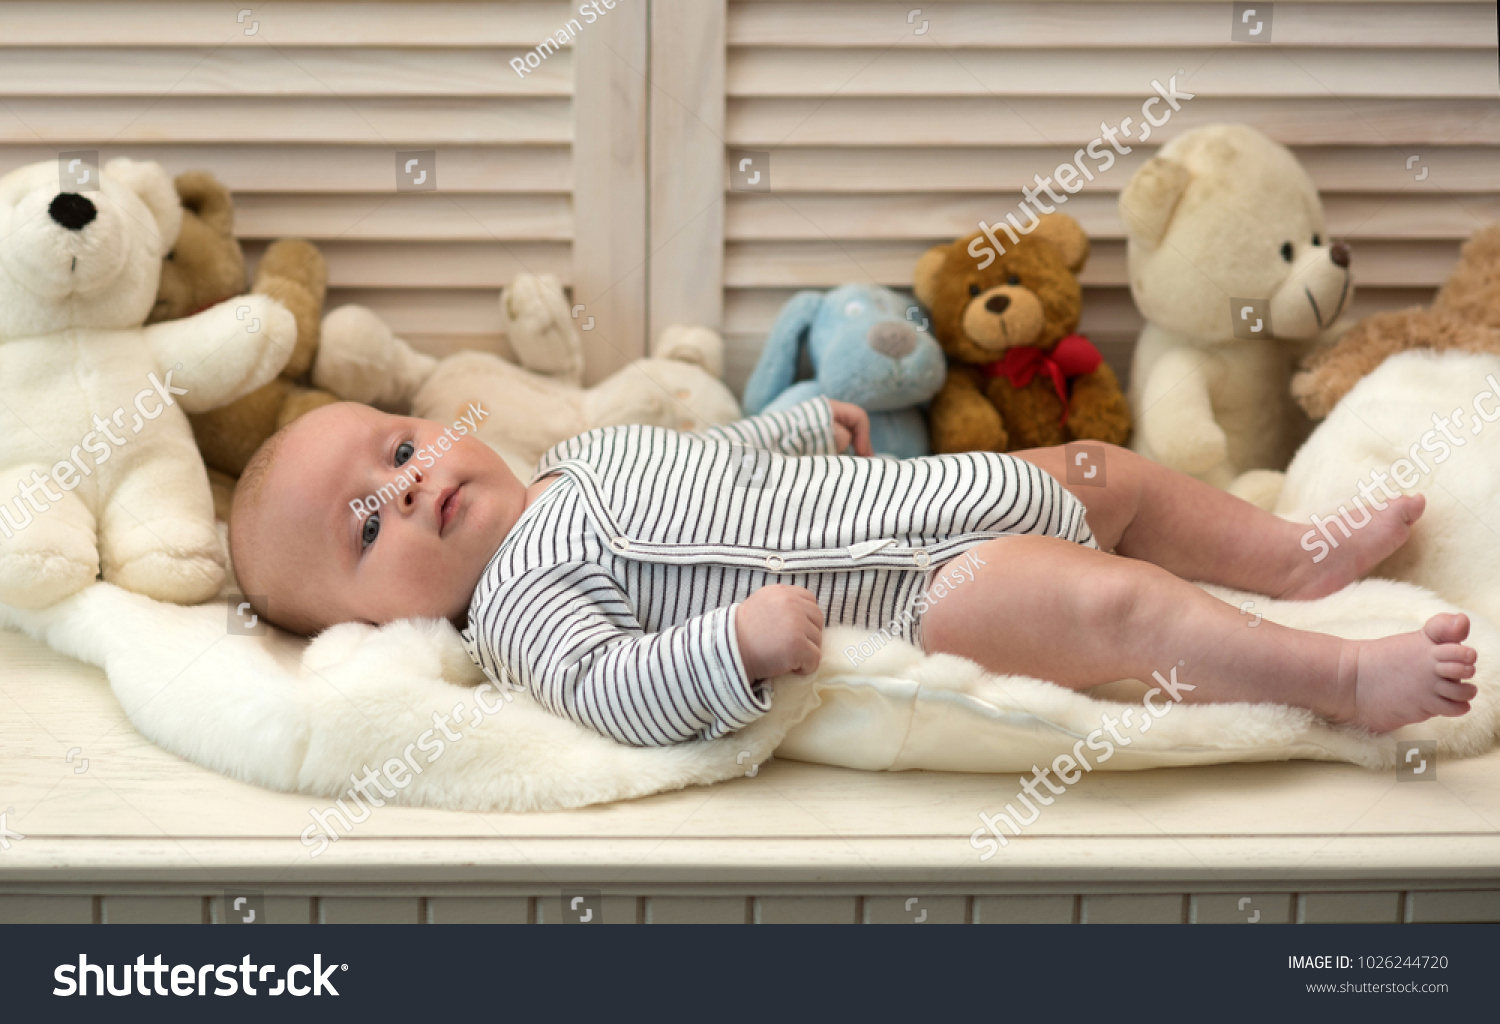 Baby boy in striped bodysuit. Baby lying on soft white duvet. Childhood and innocence concept. Infant with blue eyes and peaceful smile among teddy bears on wooden background, defocused #1026244720